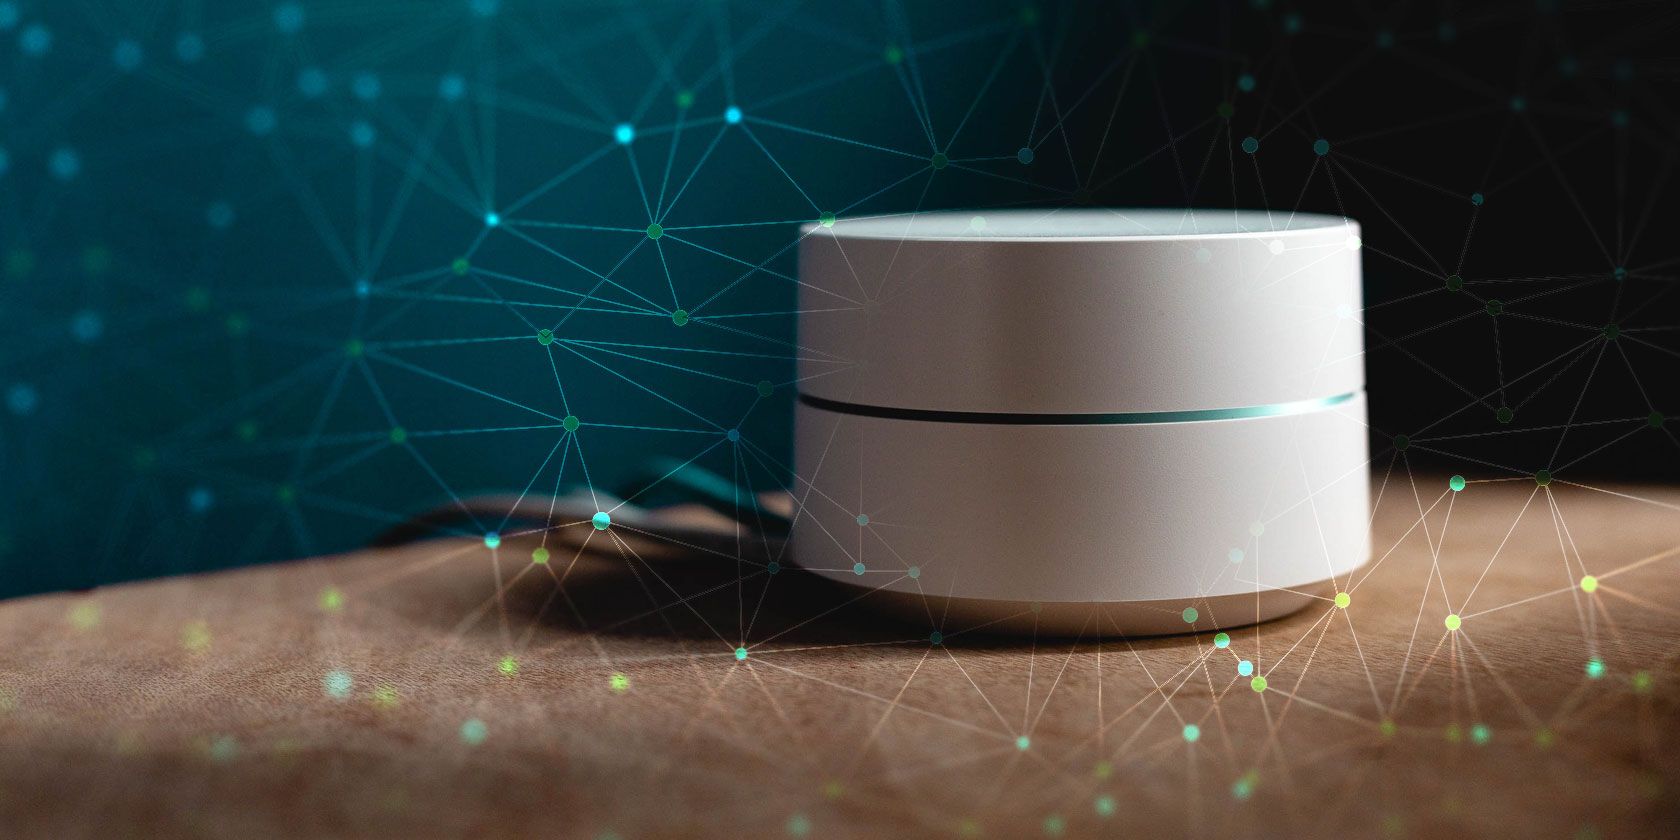 The 10 Best Mesh WiFi Networks for Your Home